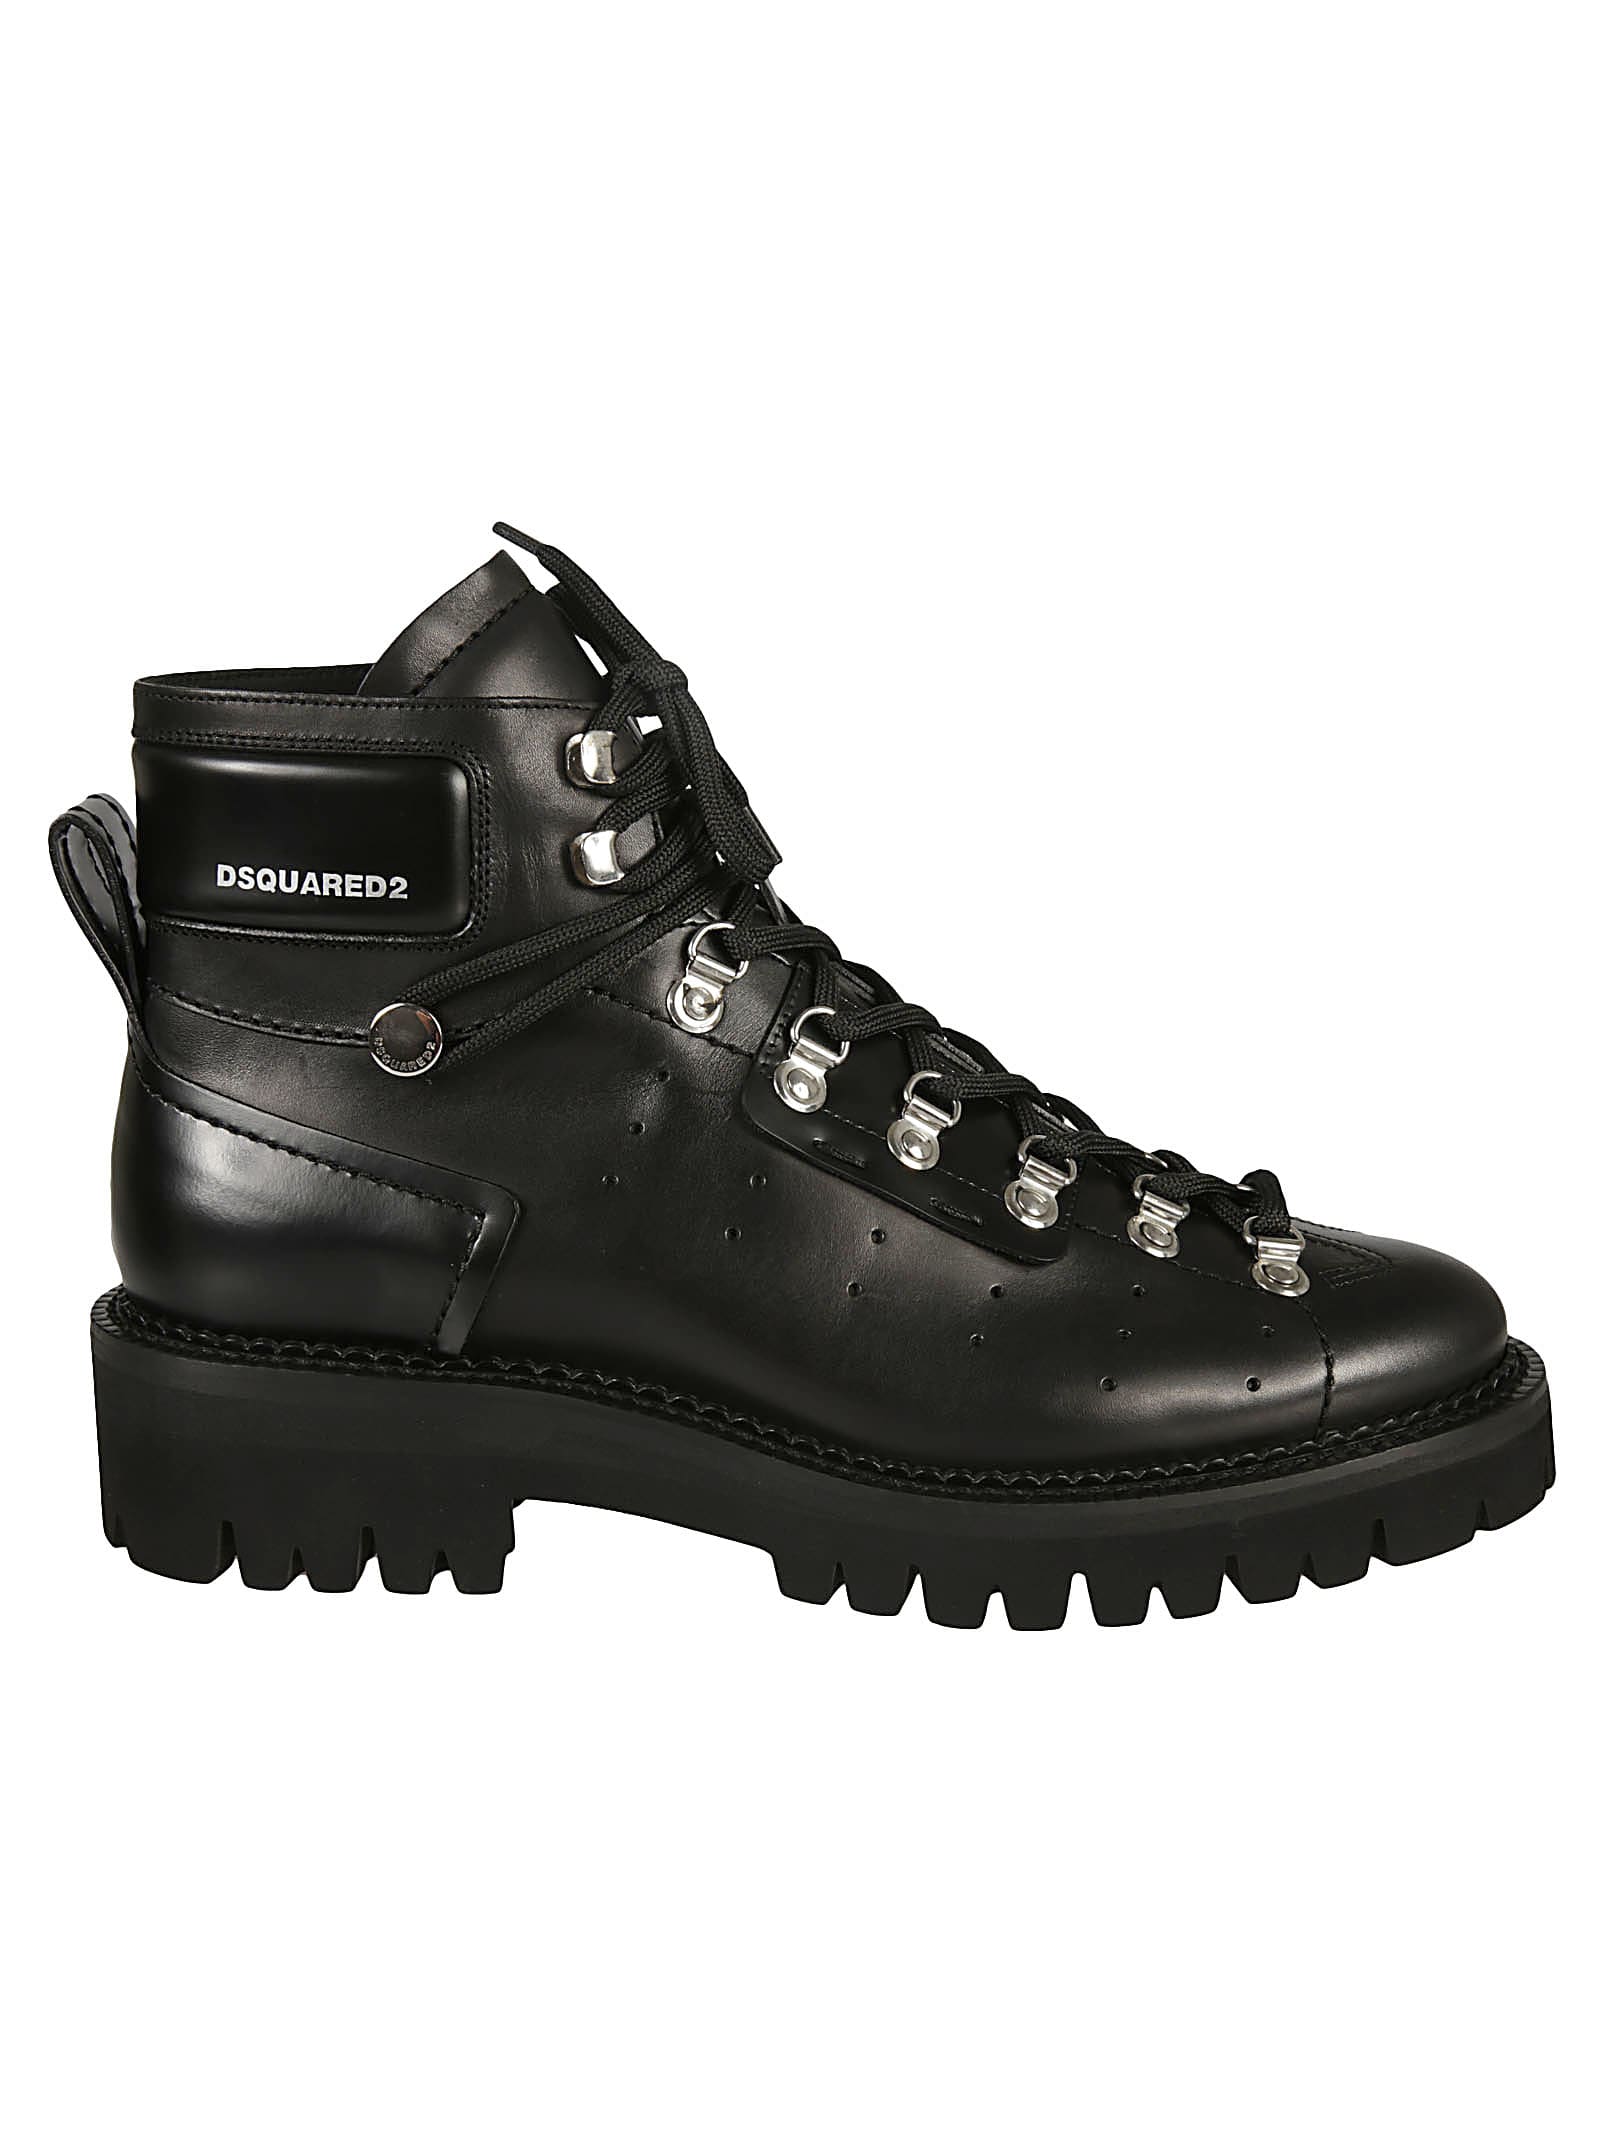 Dsquared2 Hector Hiking Boots